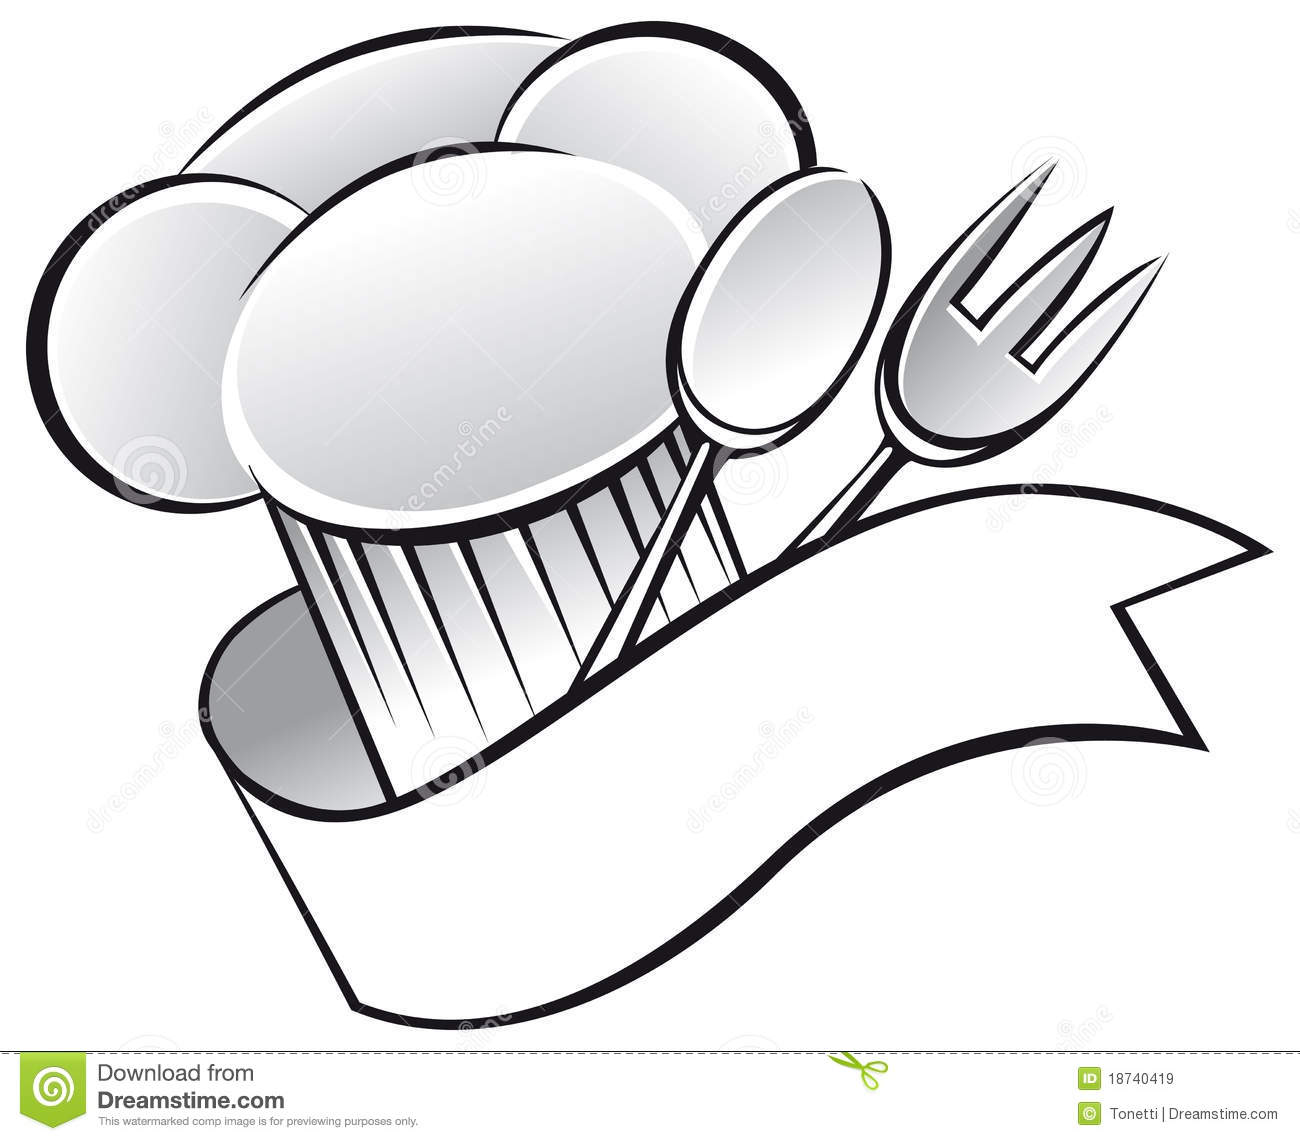 Chef clipart chef hat. Utensils and 